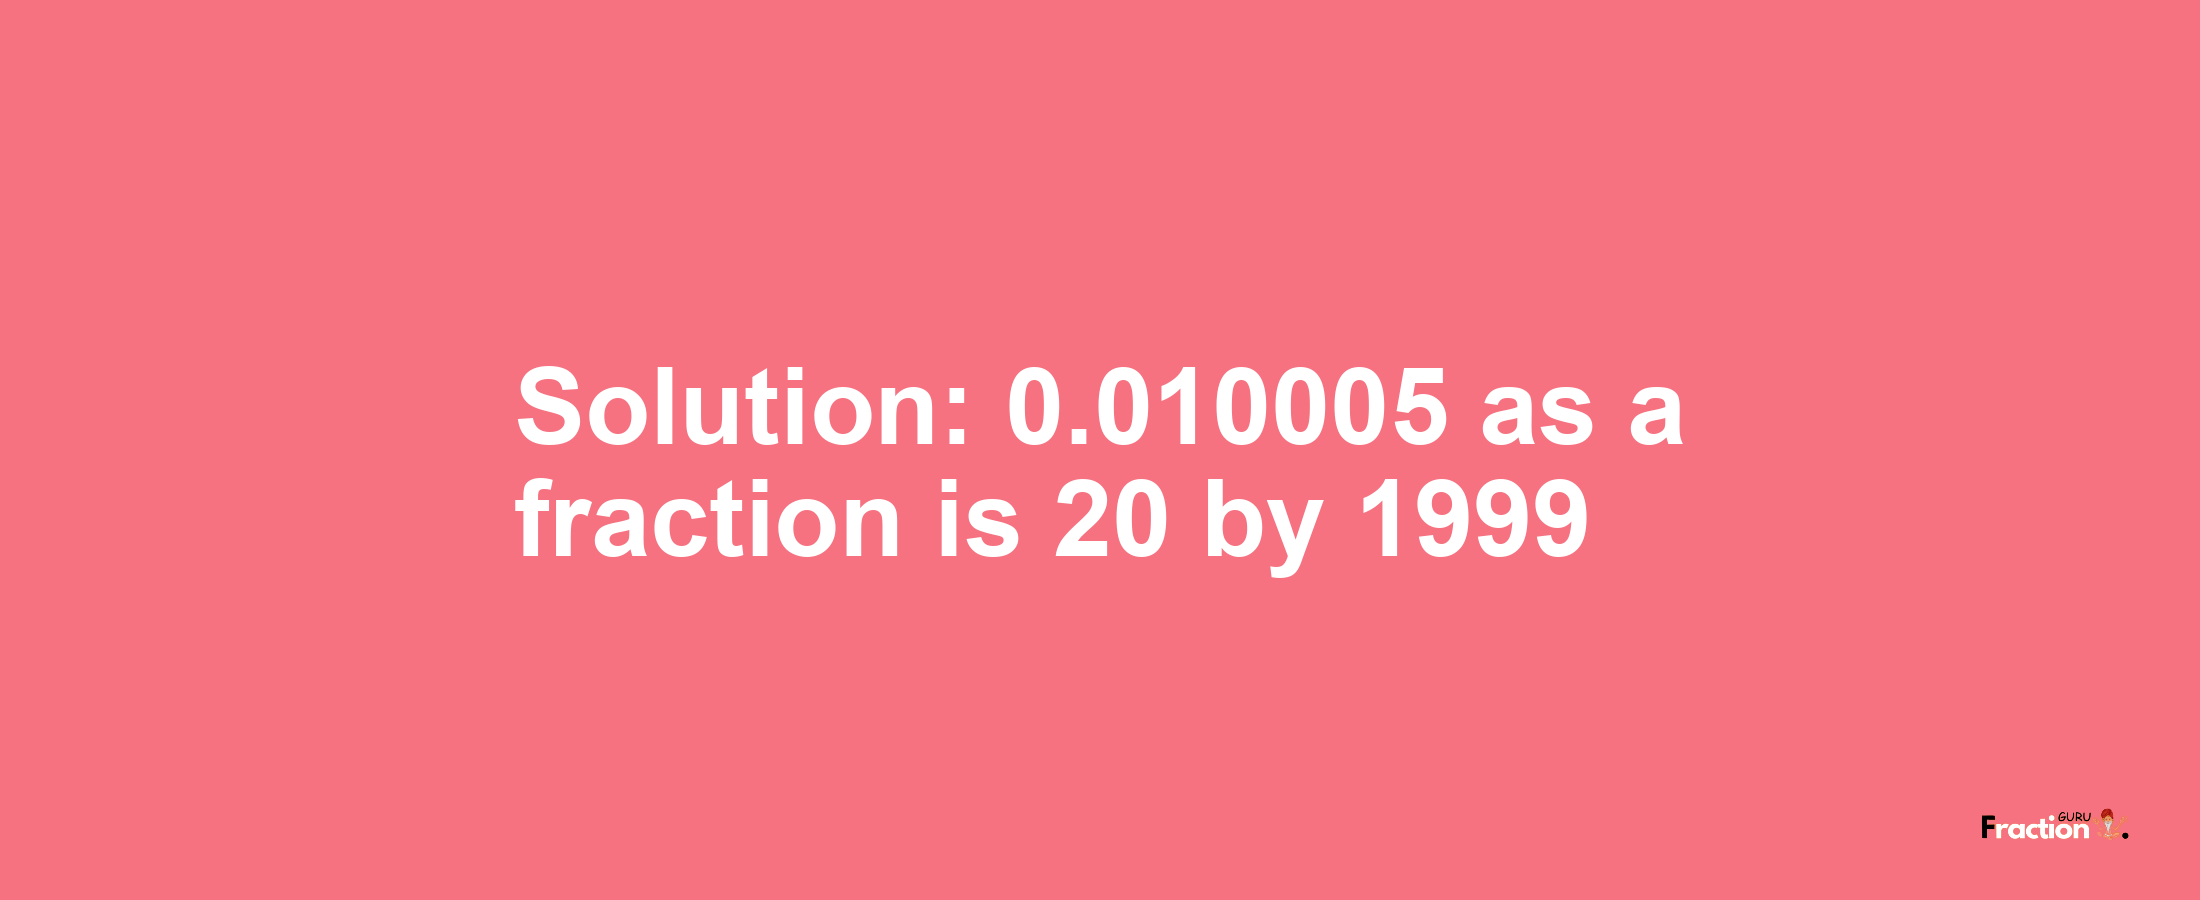 Solution:0.010005 as a fraction is 20/1999